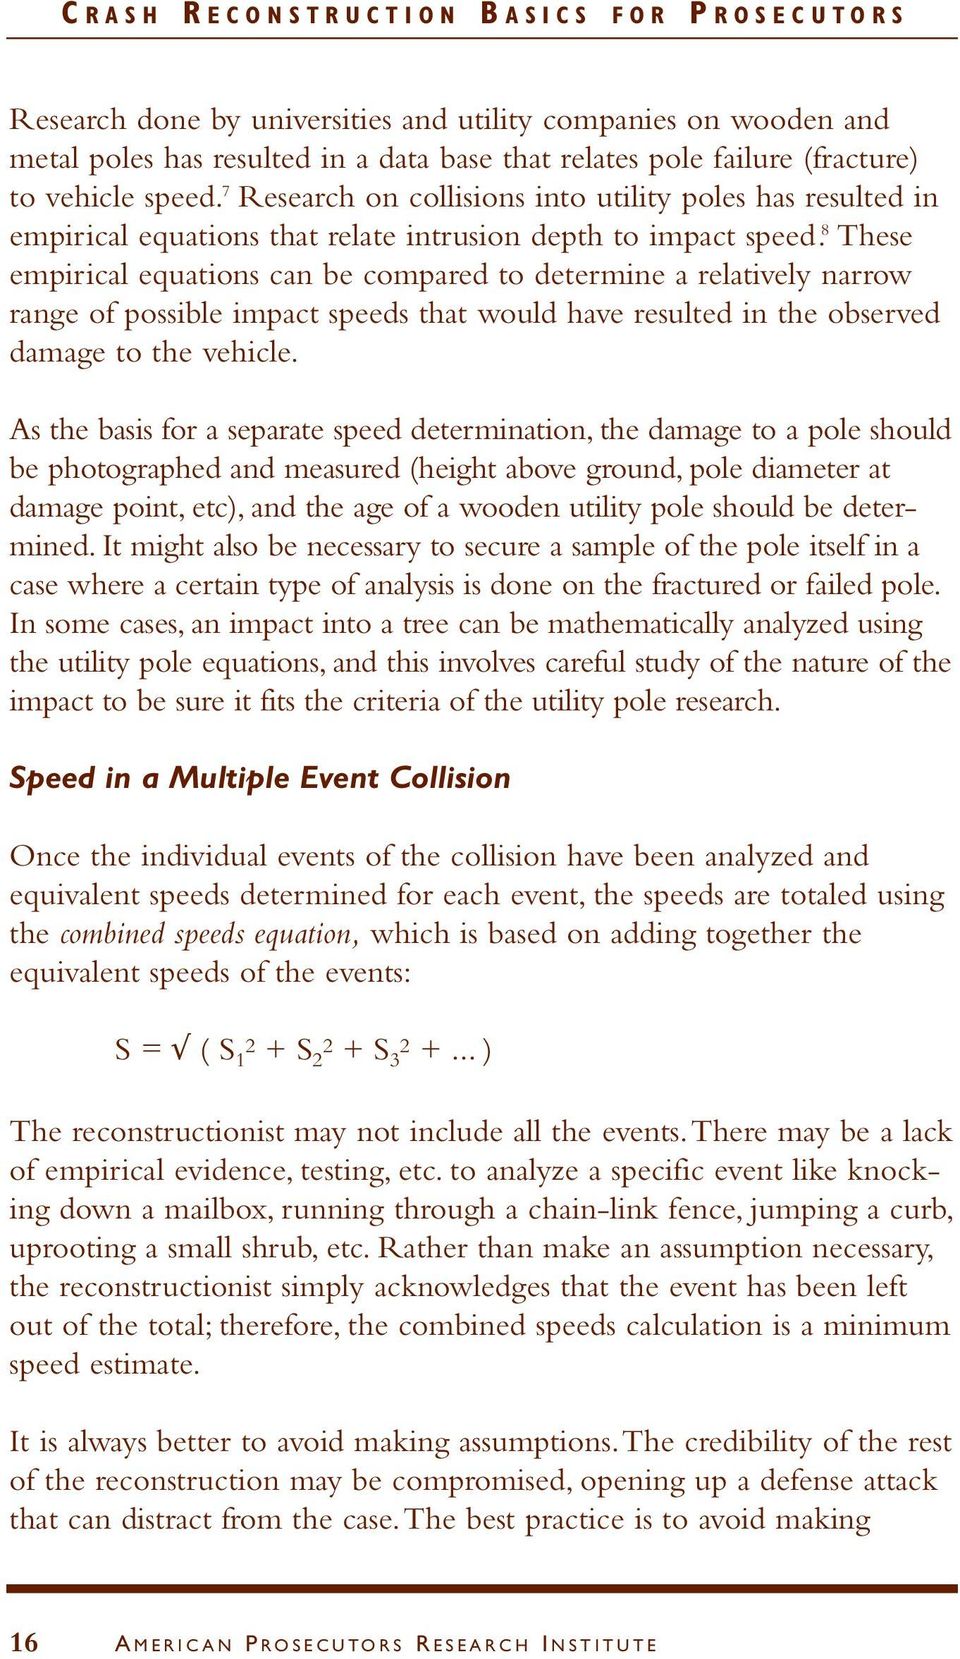 8 These empirical equations can be compared to determine a relatively narrow range of possible impact speeds that would have resulted in the observed damage to the vehicle.